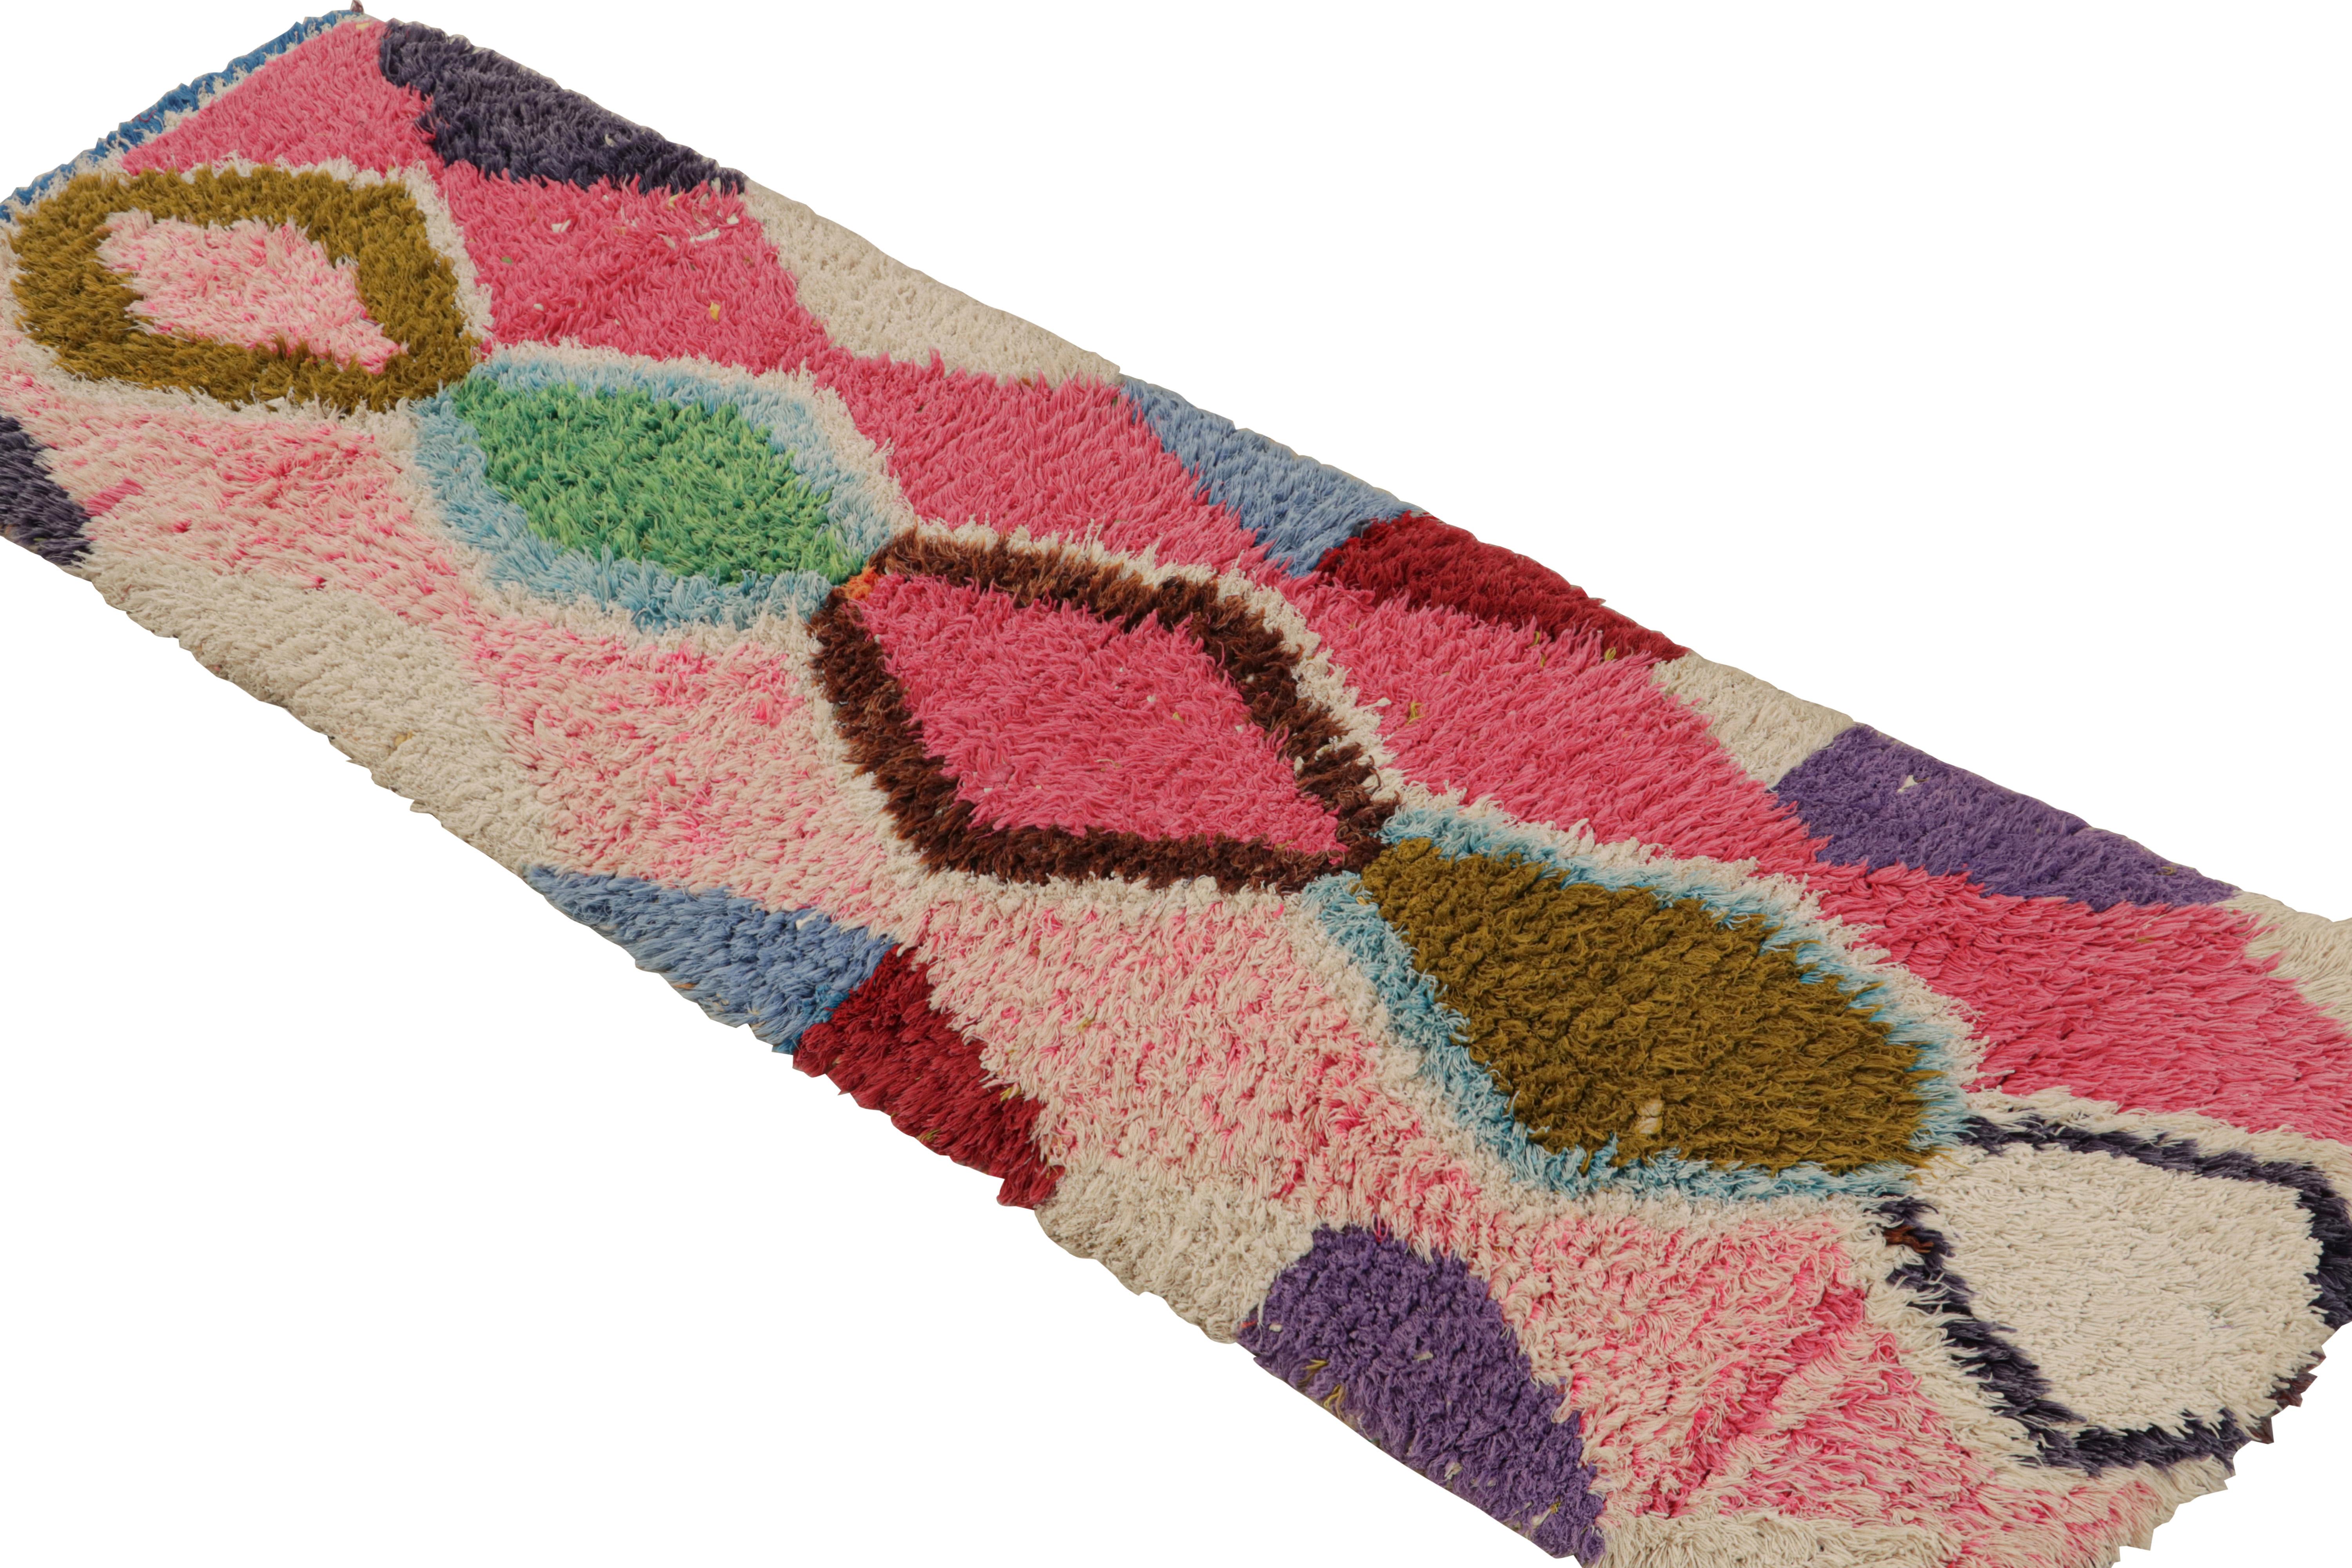 Hand-knotted in wool and cotton, circa 1950-1960, this 2x6 vintage Moroccan runner rug is believed to hail from the Azilal tribe. 

On the Design: 

This piece enjoys a lush high pile with polychromatic primitivist Berber geometric lozenges